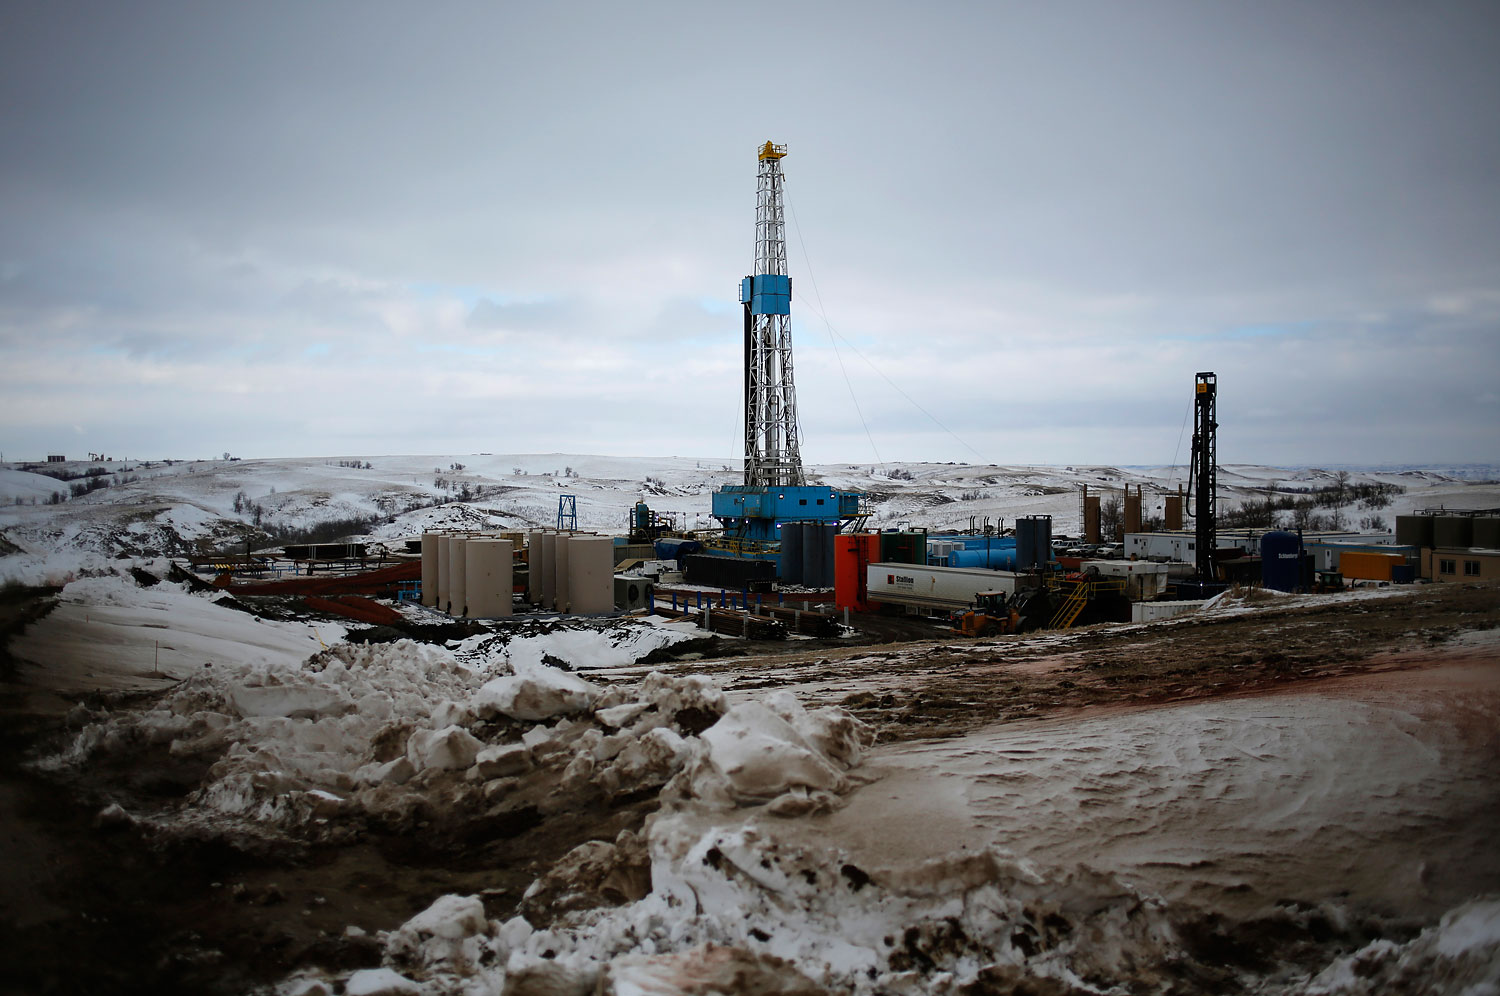 An oil derrick is seen at a fracking site for extracting oil outside of Williston, North Dakota March 11, 2013. (Shannon Stapleton—Reuters)